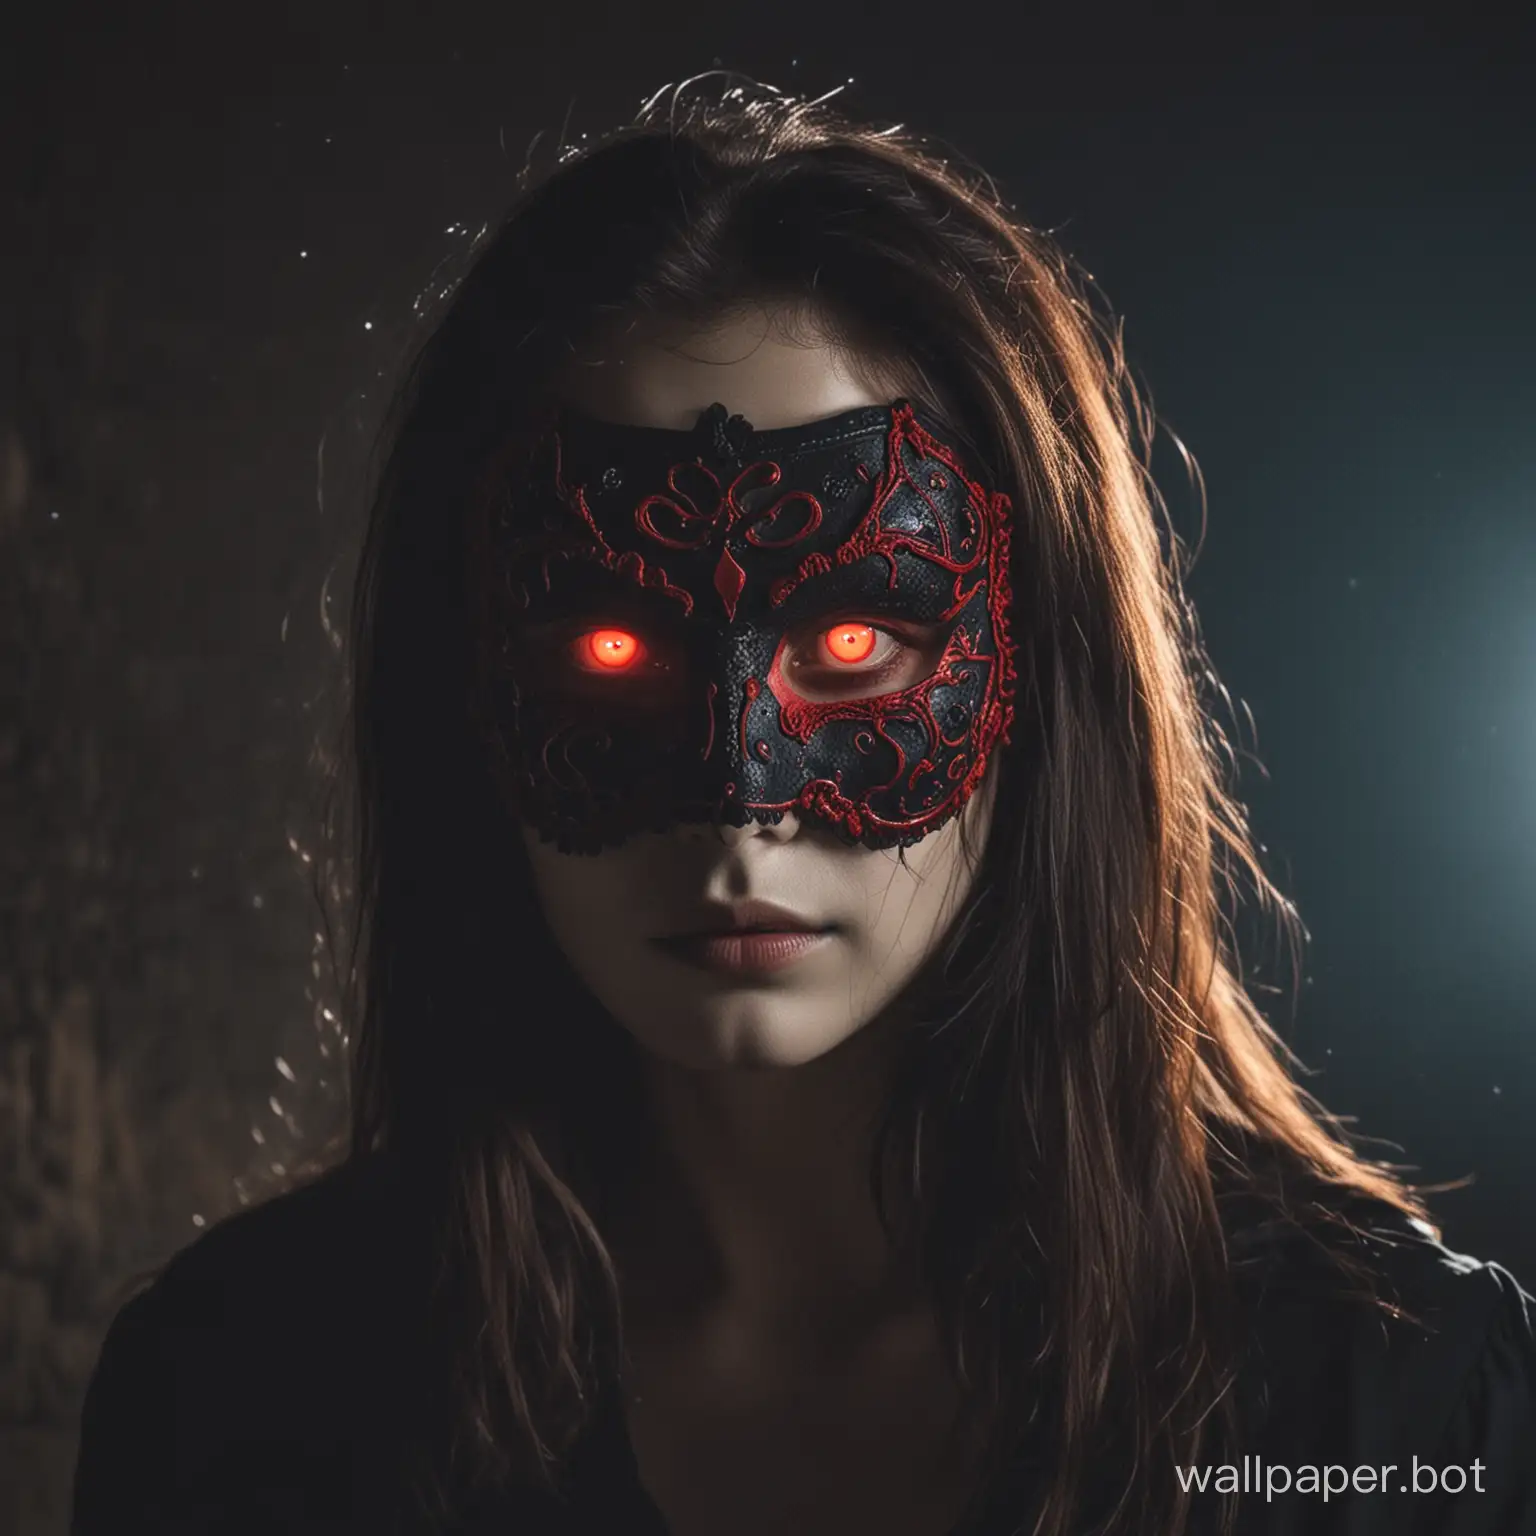 Mysterious-Figure-with-Glowing-Red-Eyes-in-Mask-at-Night